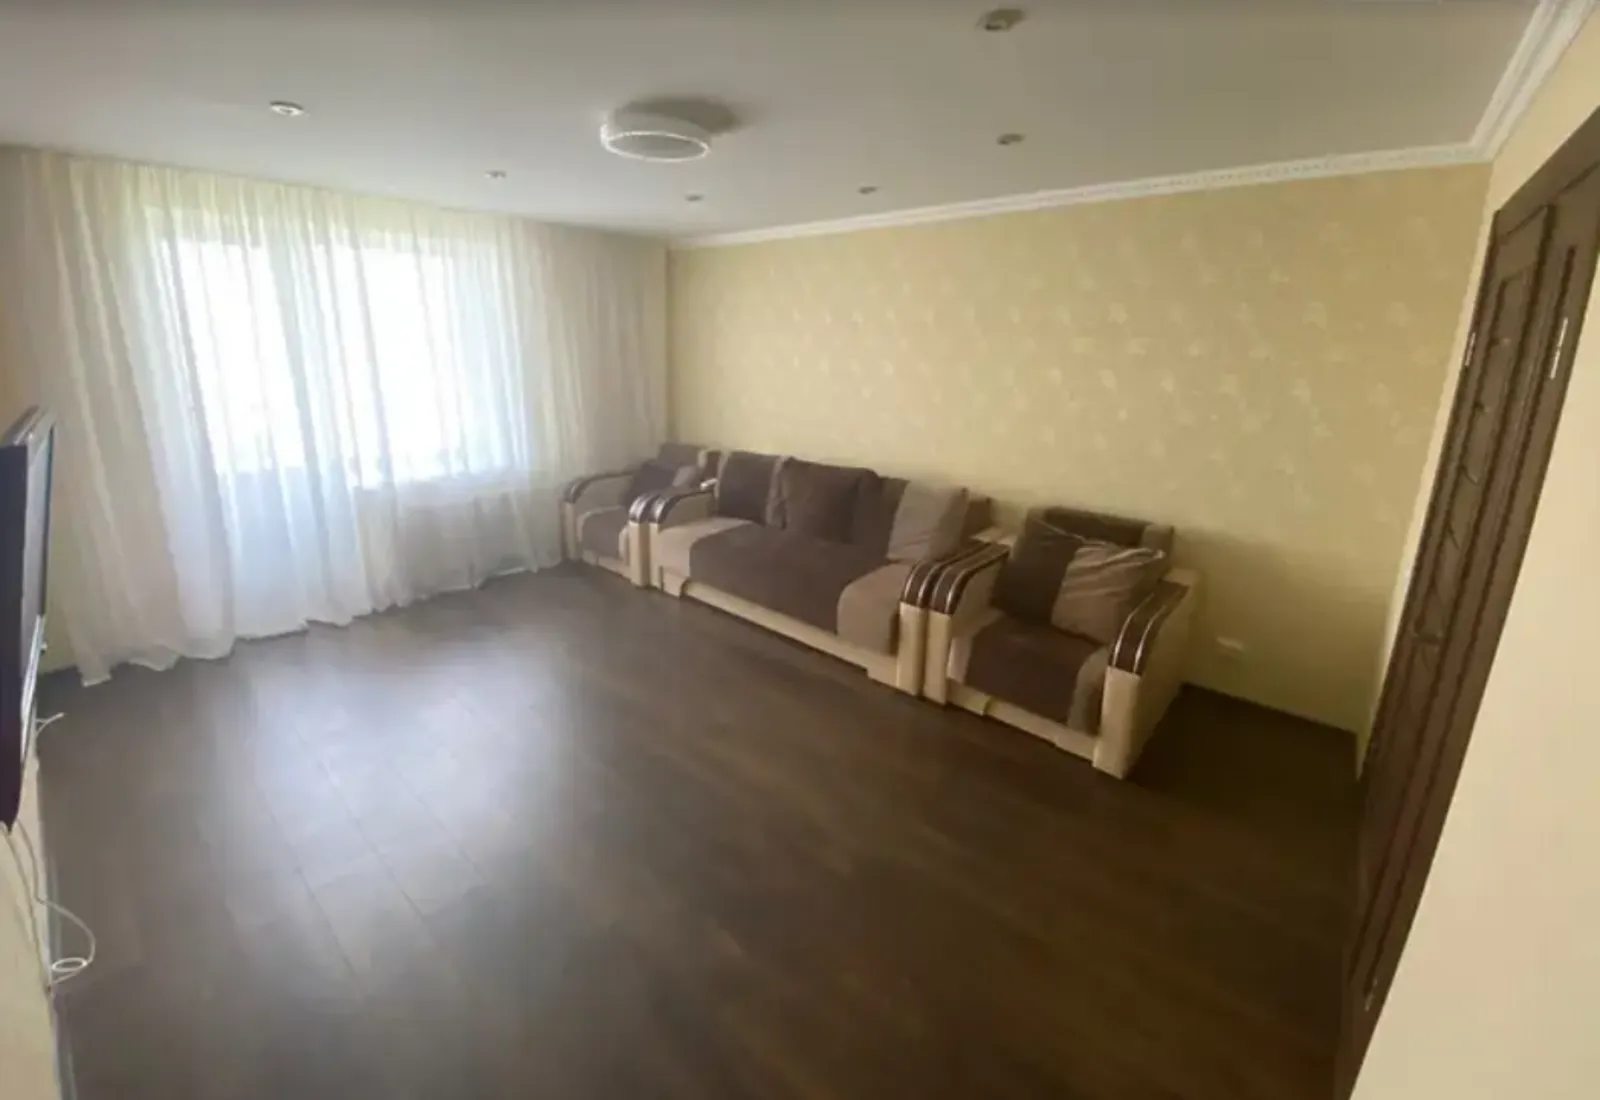 Apartments for sale. 2 rooms, 68 m², 7th floor/9 floors. Bam, Ternopil. 